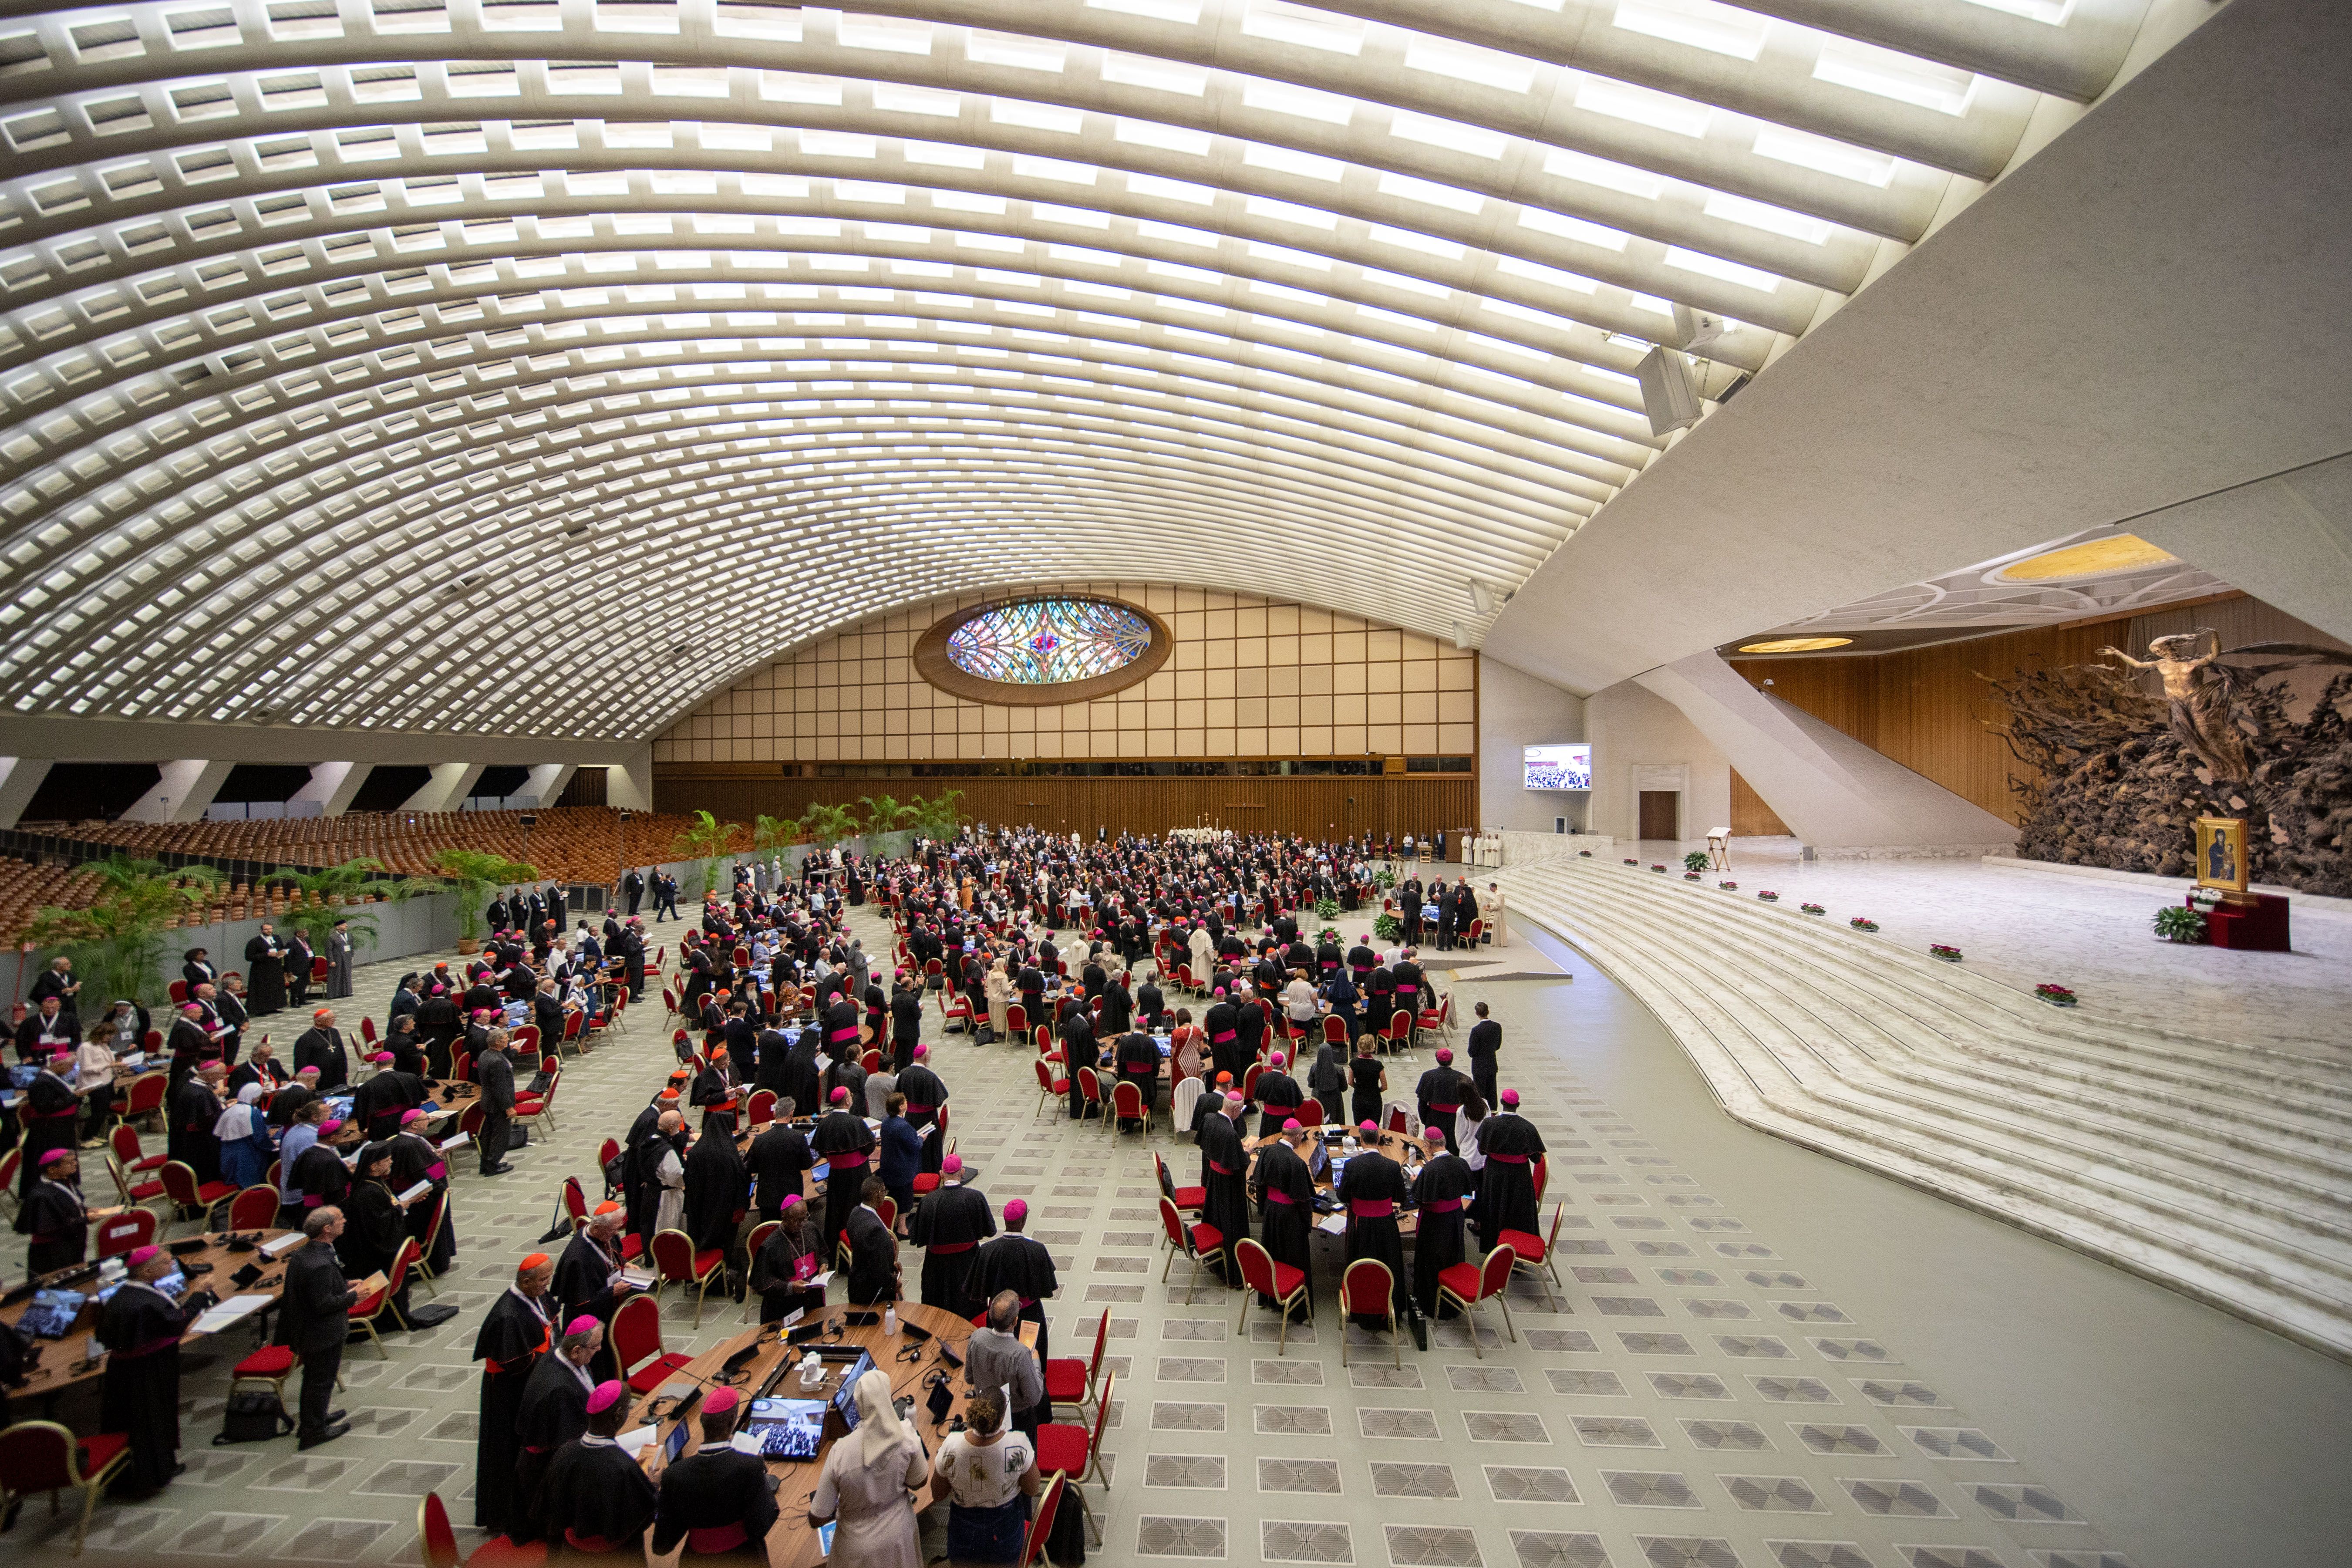 What is being discussed during the first week of the Synod on Synodality?